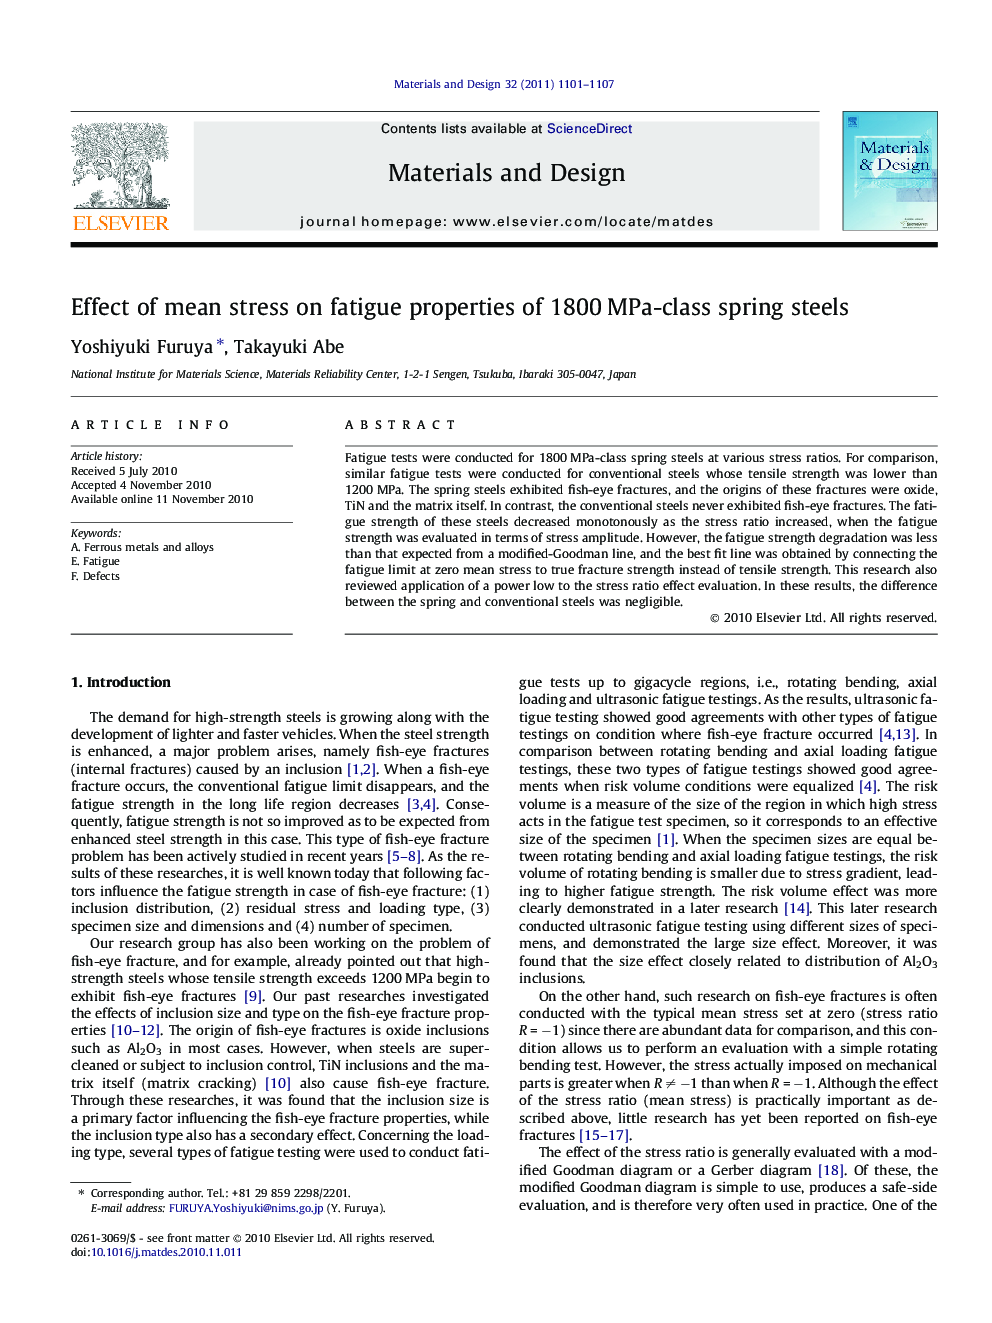 Effect of mean stress on fatigue properties of 1800 MPa-class spring steels